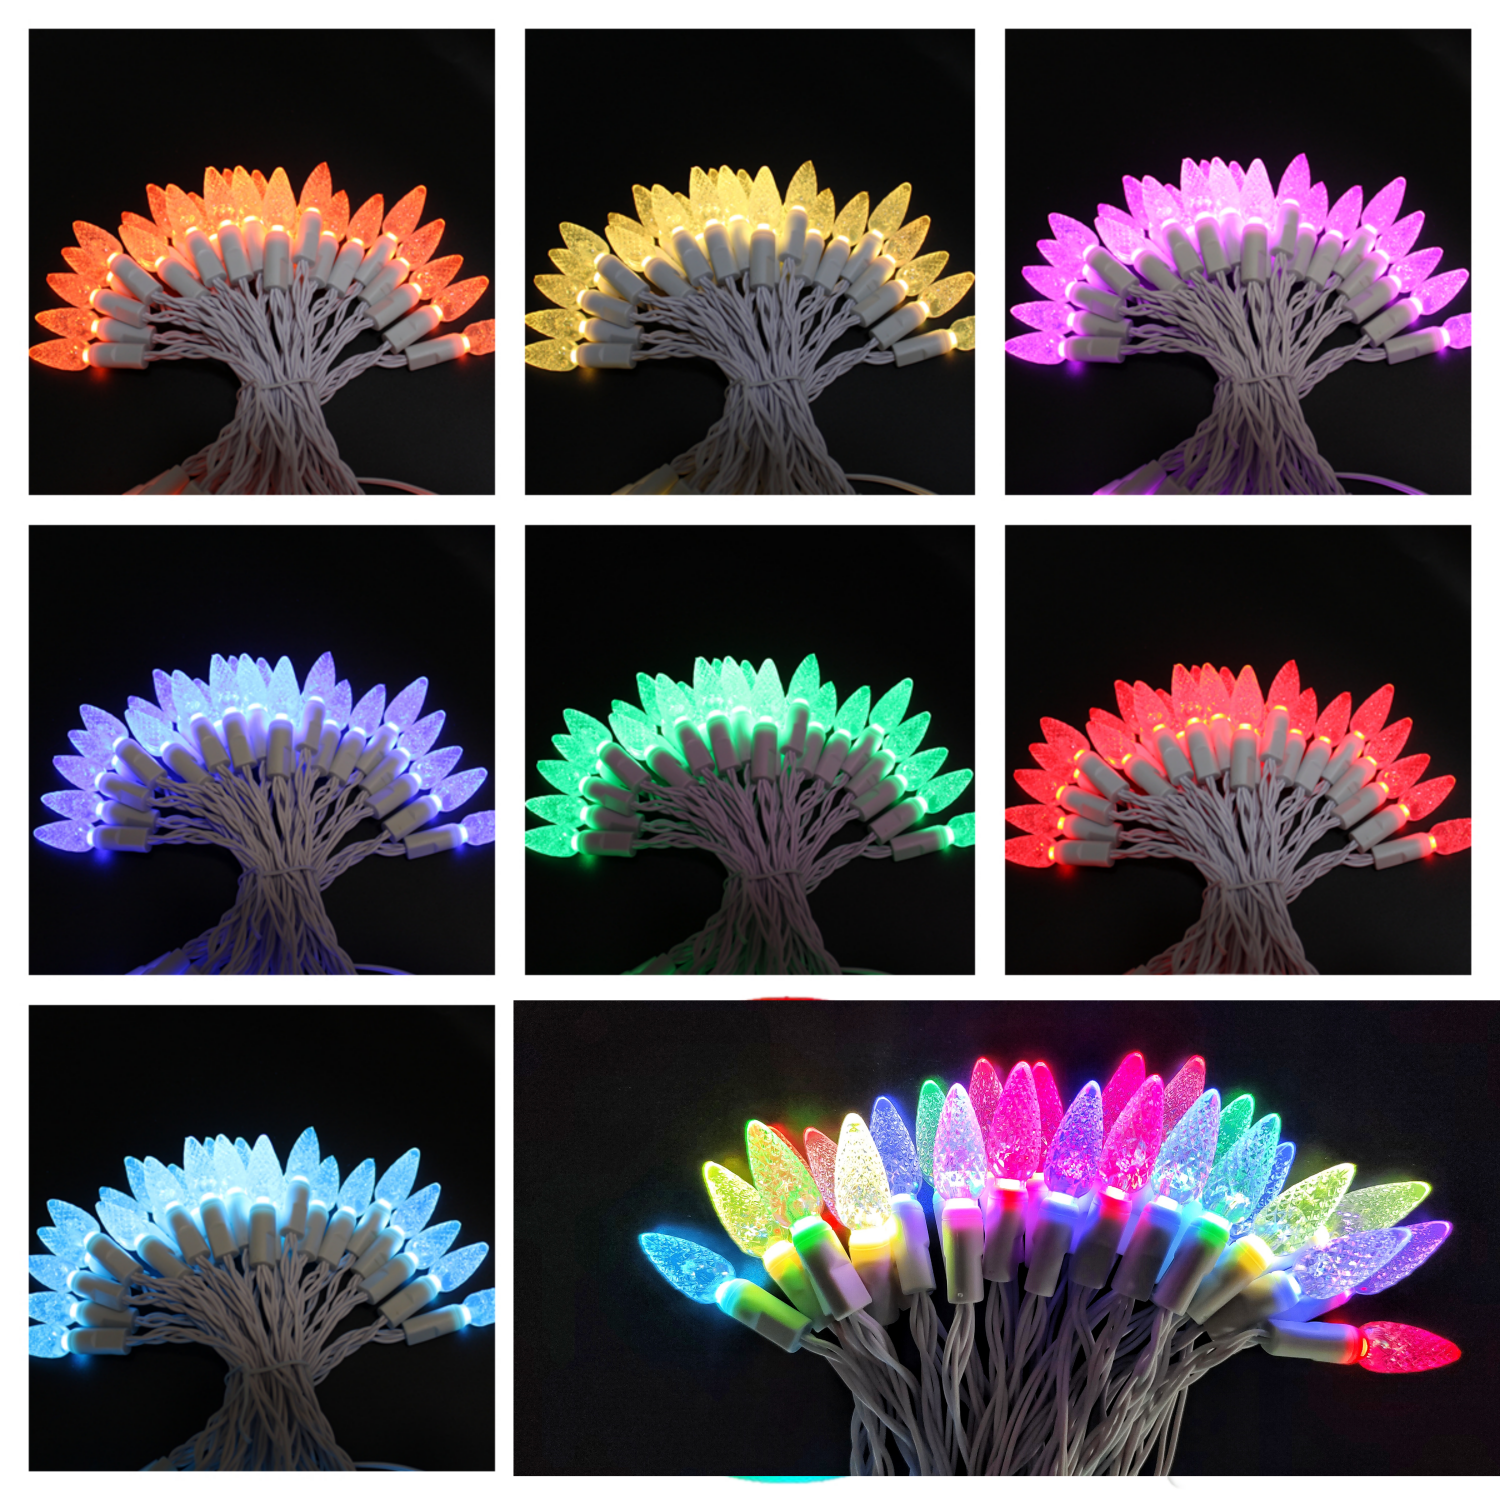 50 Bulbs LED C6 Christmas Lights RGB Color Synchronous Change with Remote Timer, White Wire